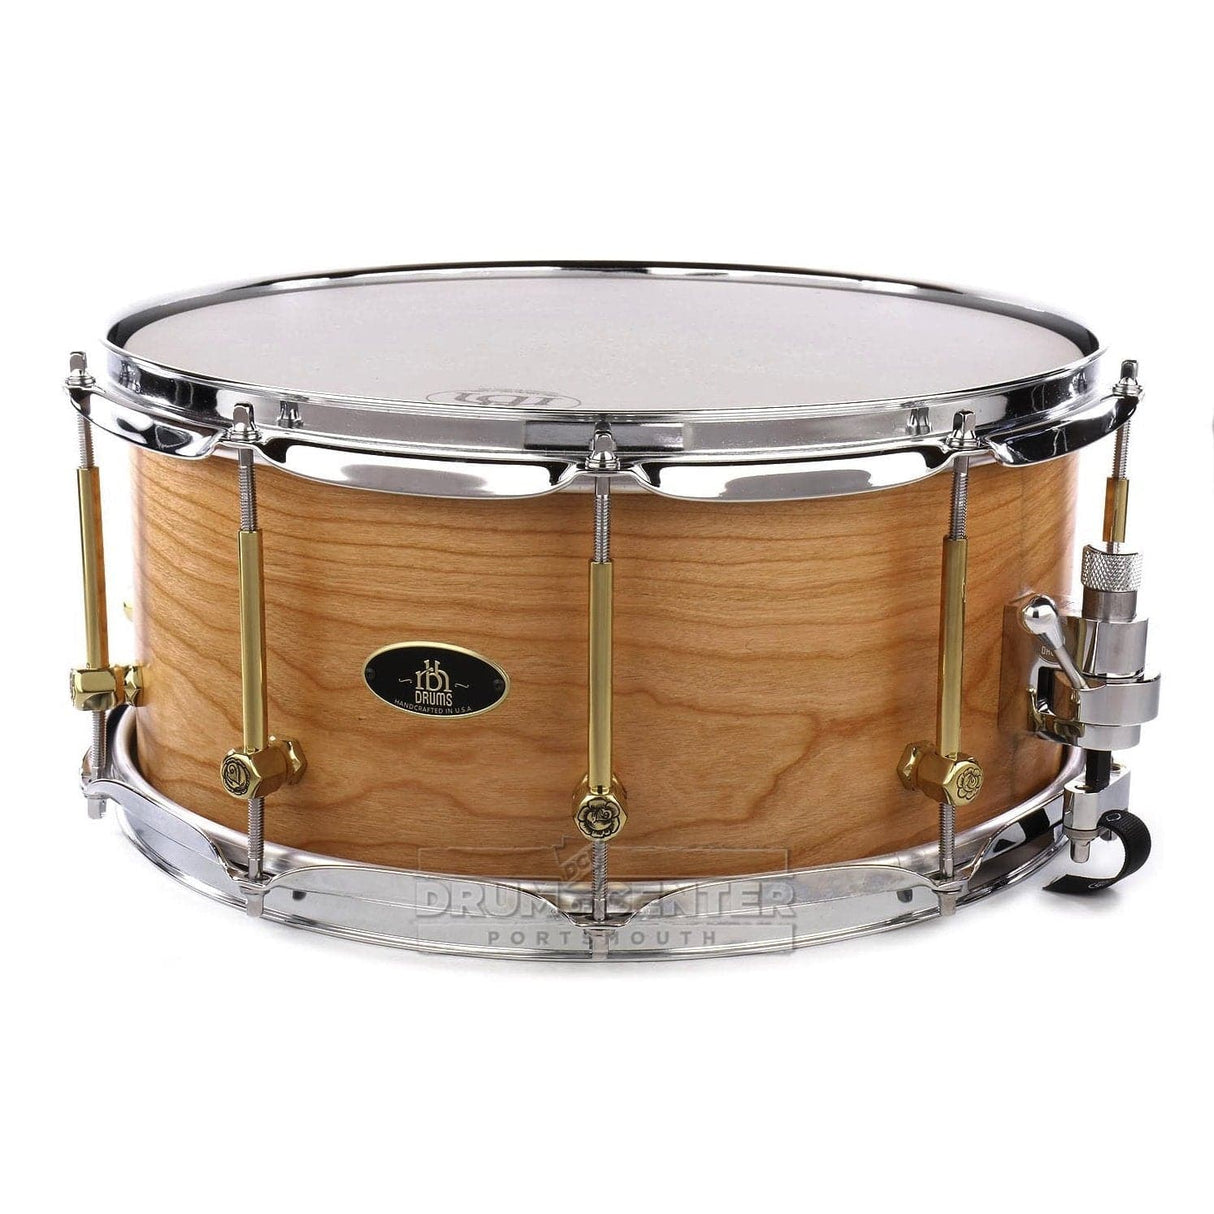 RBH Prestige Solid Cherry Snare Drum 14x6.5 w/ Engraved Lugs + FREE Case